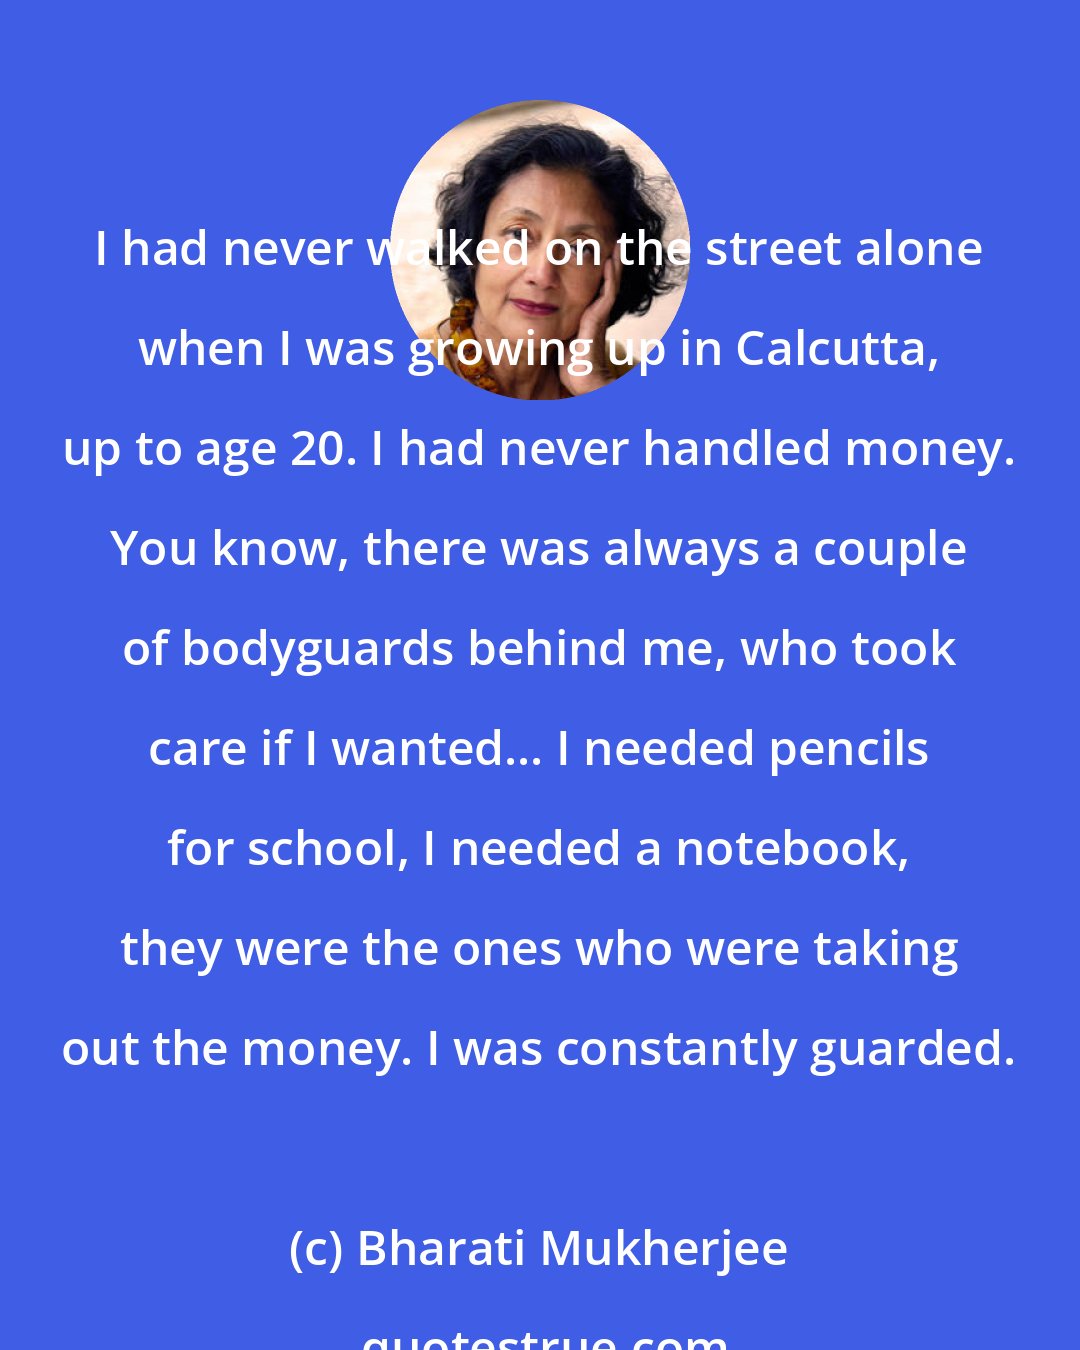 Bharati Mukherjee: I had never walked on the street alone when I was growing up in Calcutta, up to age 20. I had never handled money. You know, there was always a couple of bodyguards behind me, who took care if I wanted... I needed pencils for school, I needed a notebook, they were the ones who were taking out the money. I was constantly guarded.